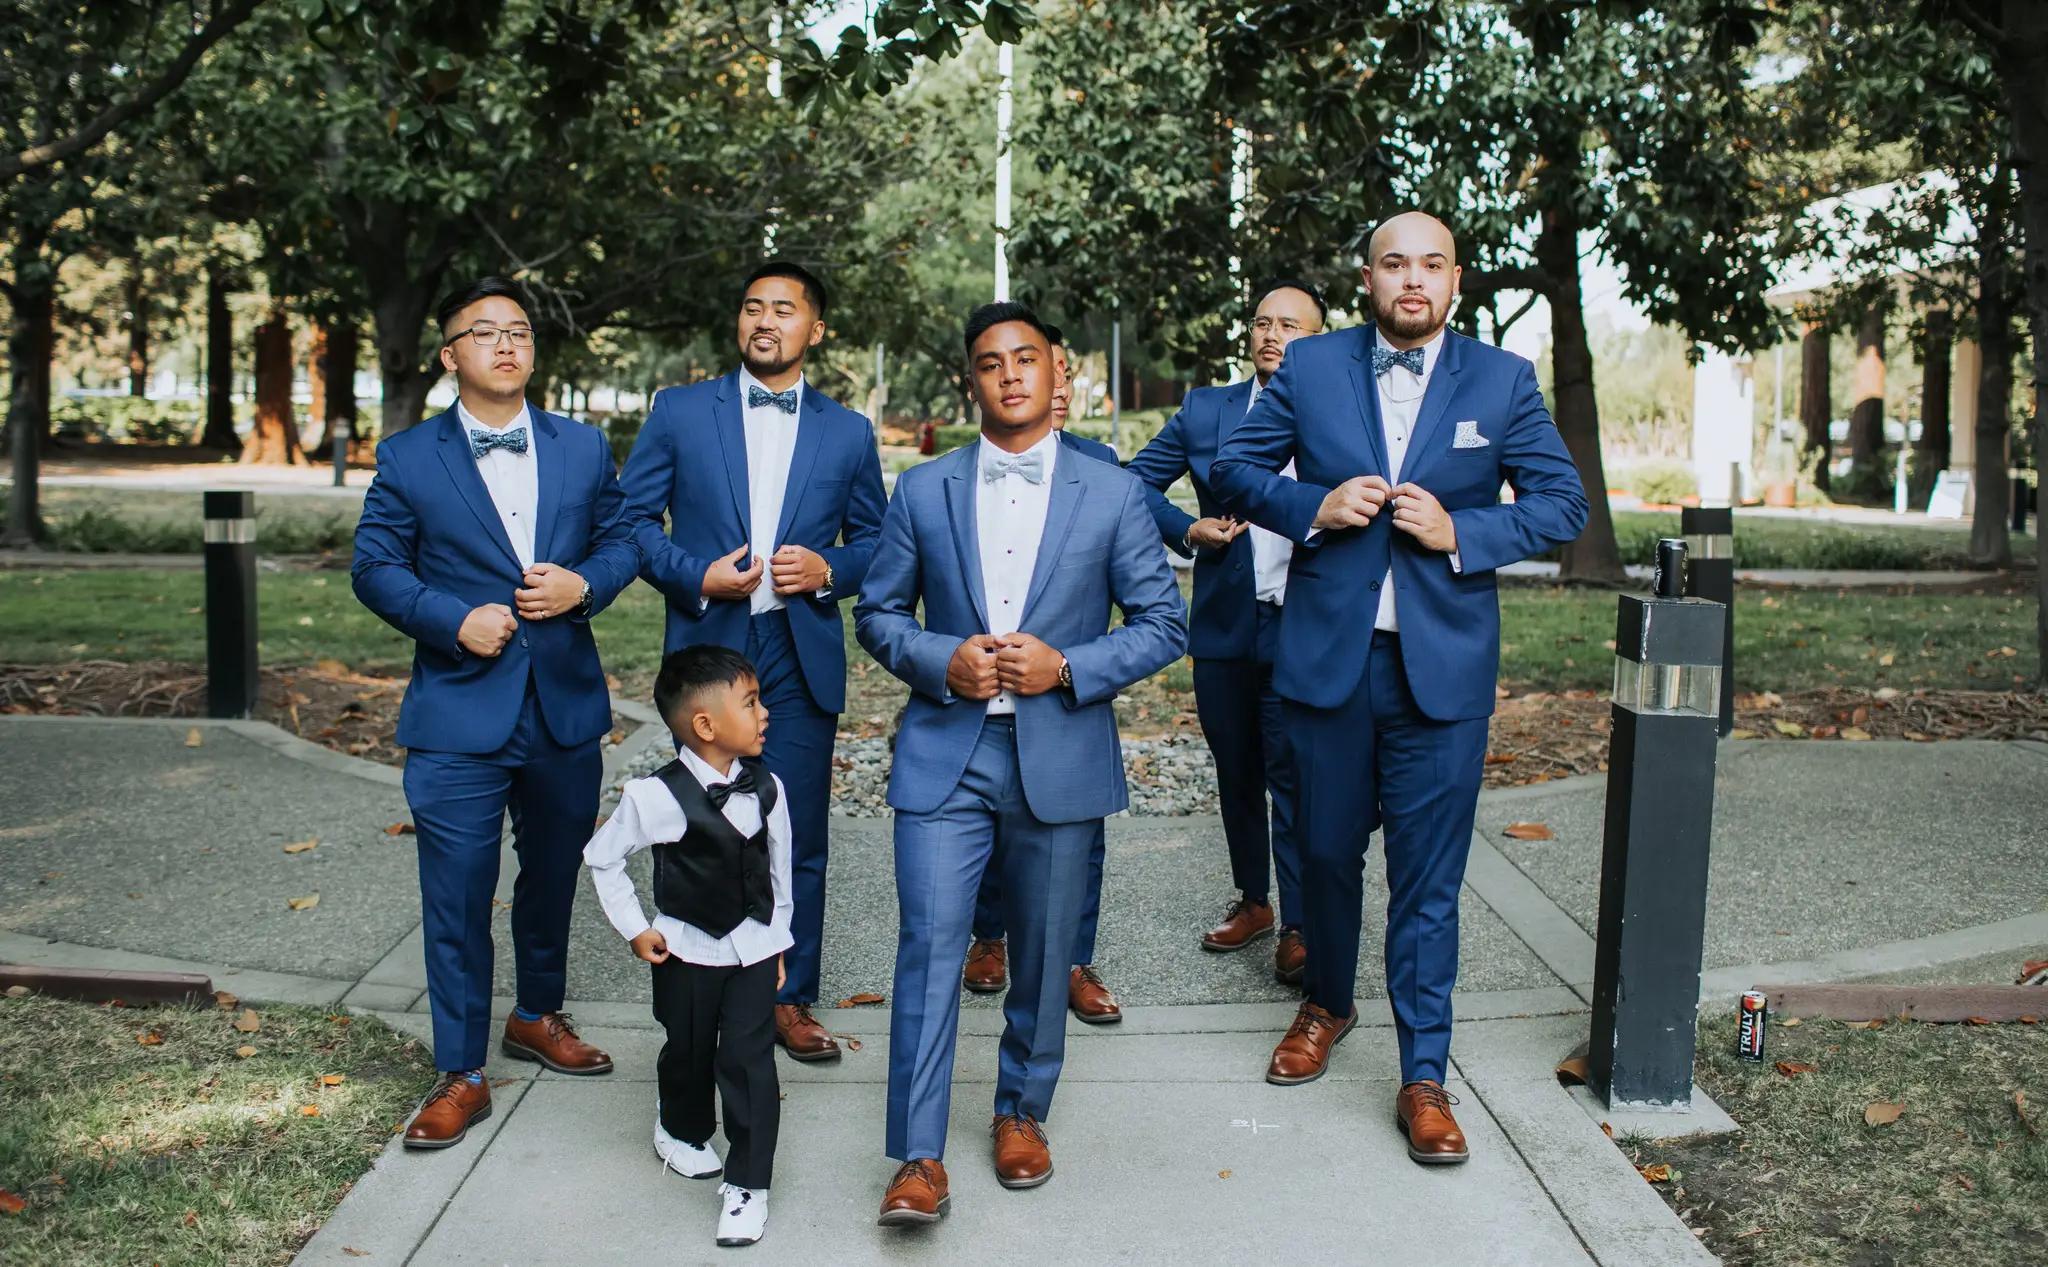 Men wearing blue suits walking with a child with black suit.